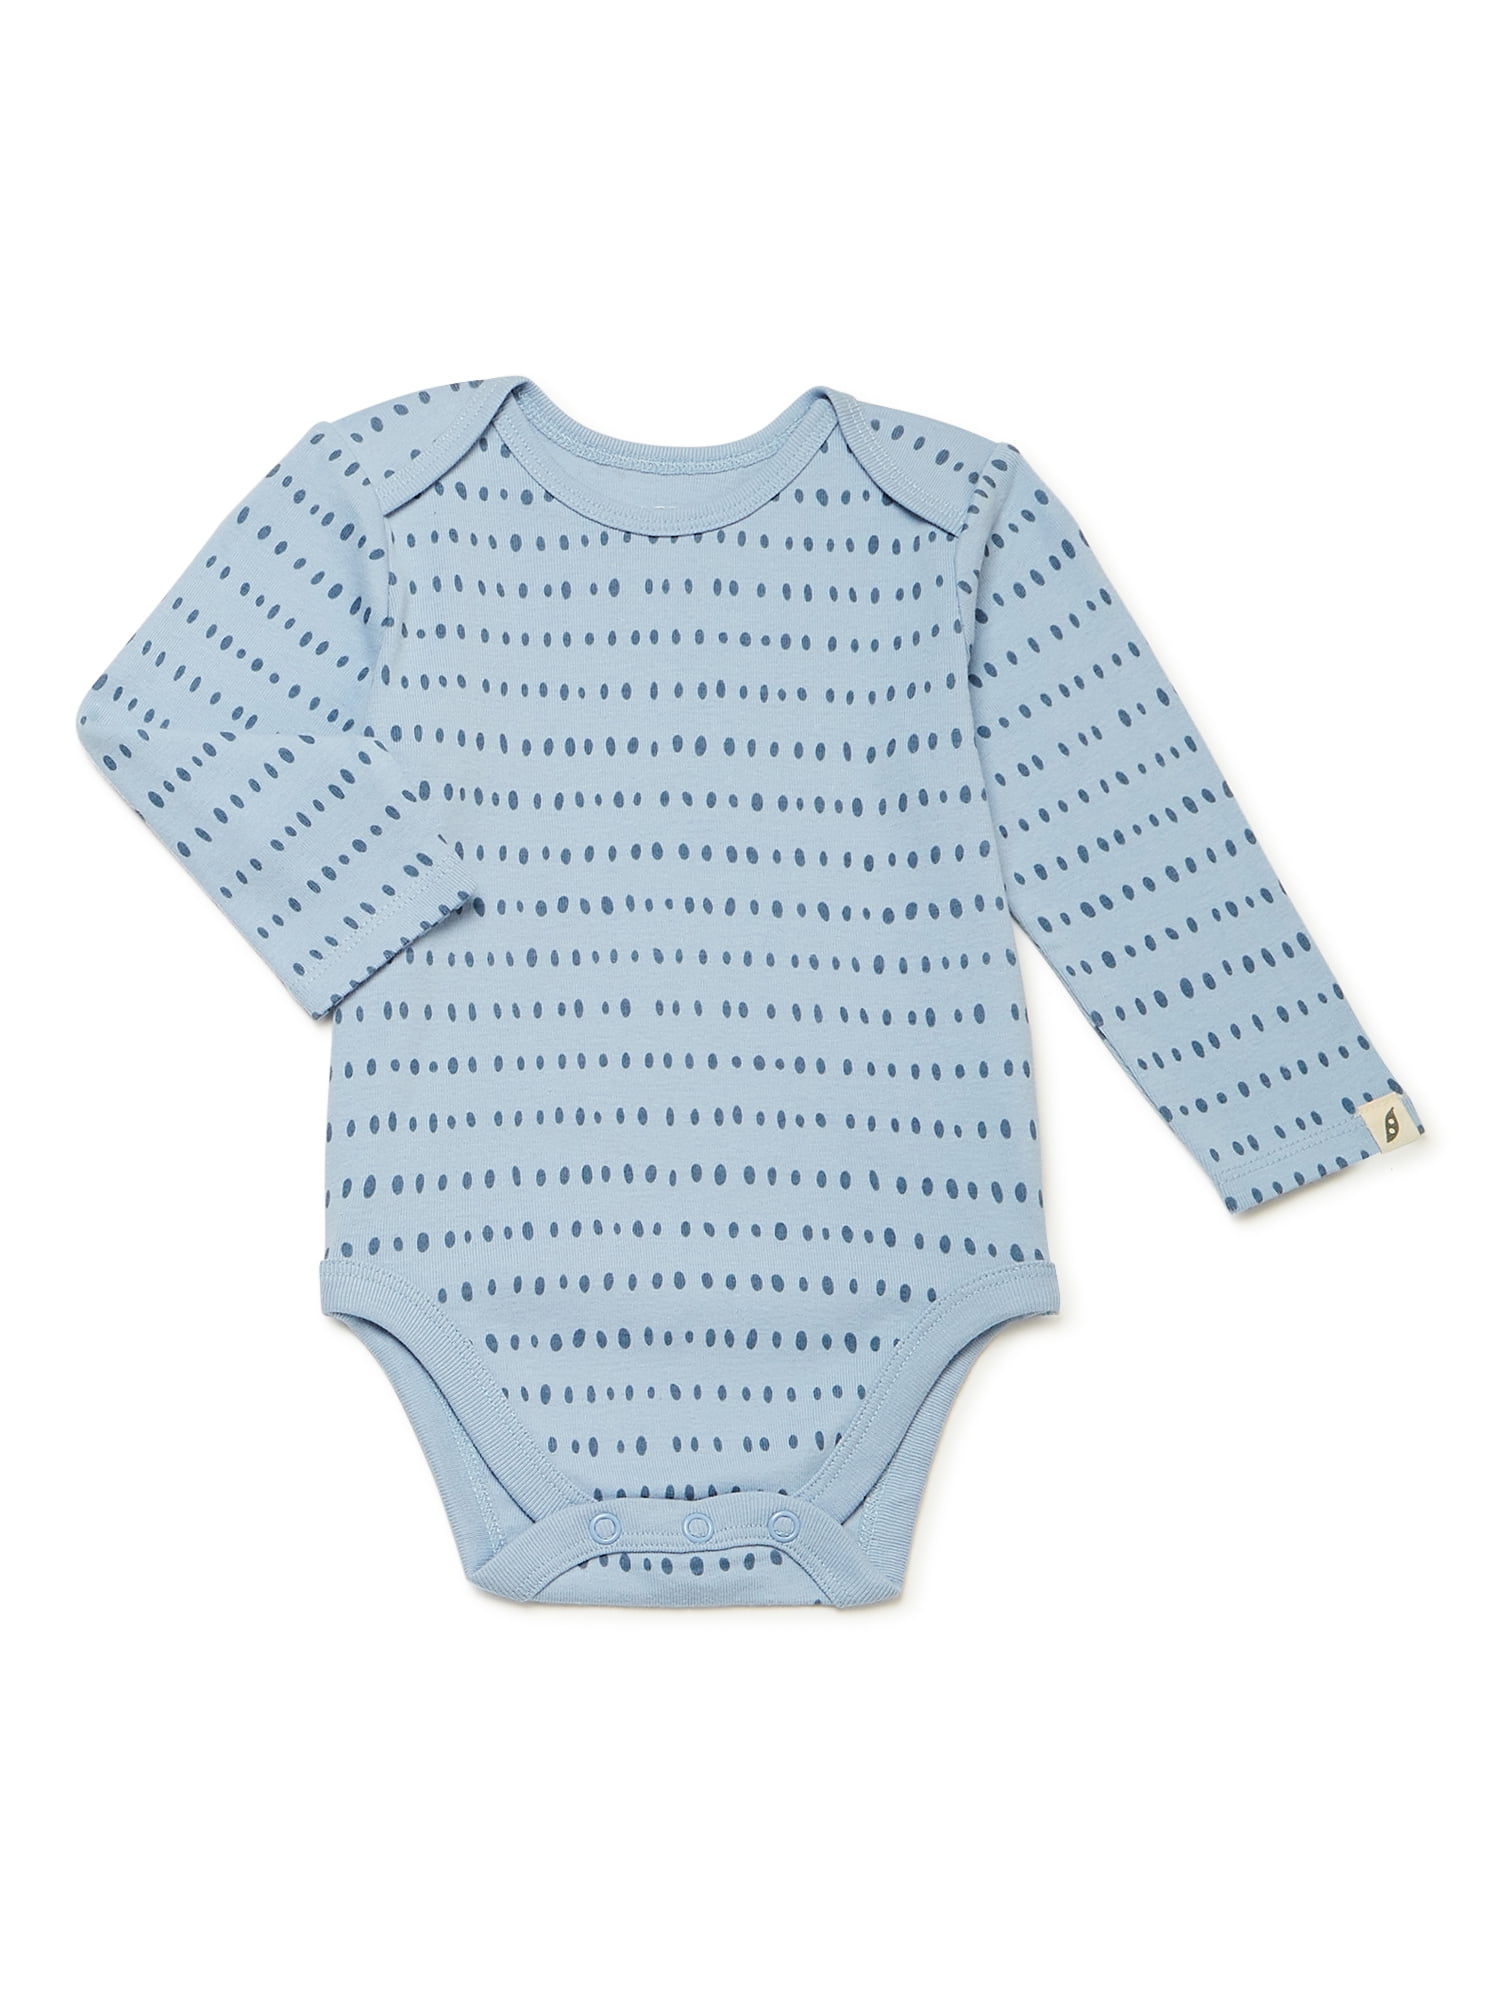 easy-peasy Baby Print Bodysuit with Long Sleeves, Sizes 0/3-24 Months